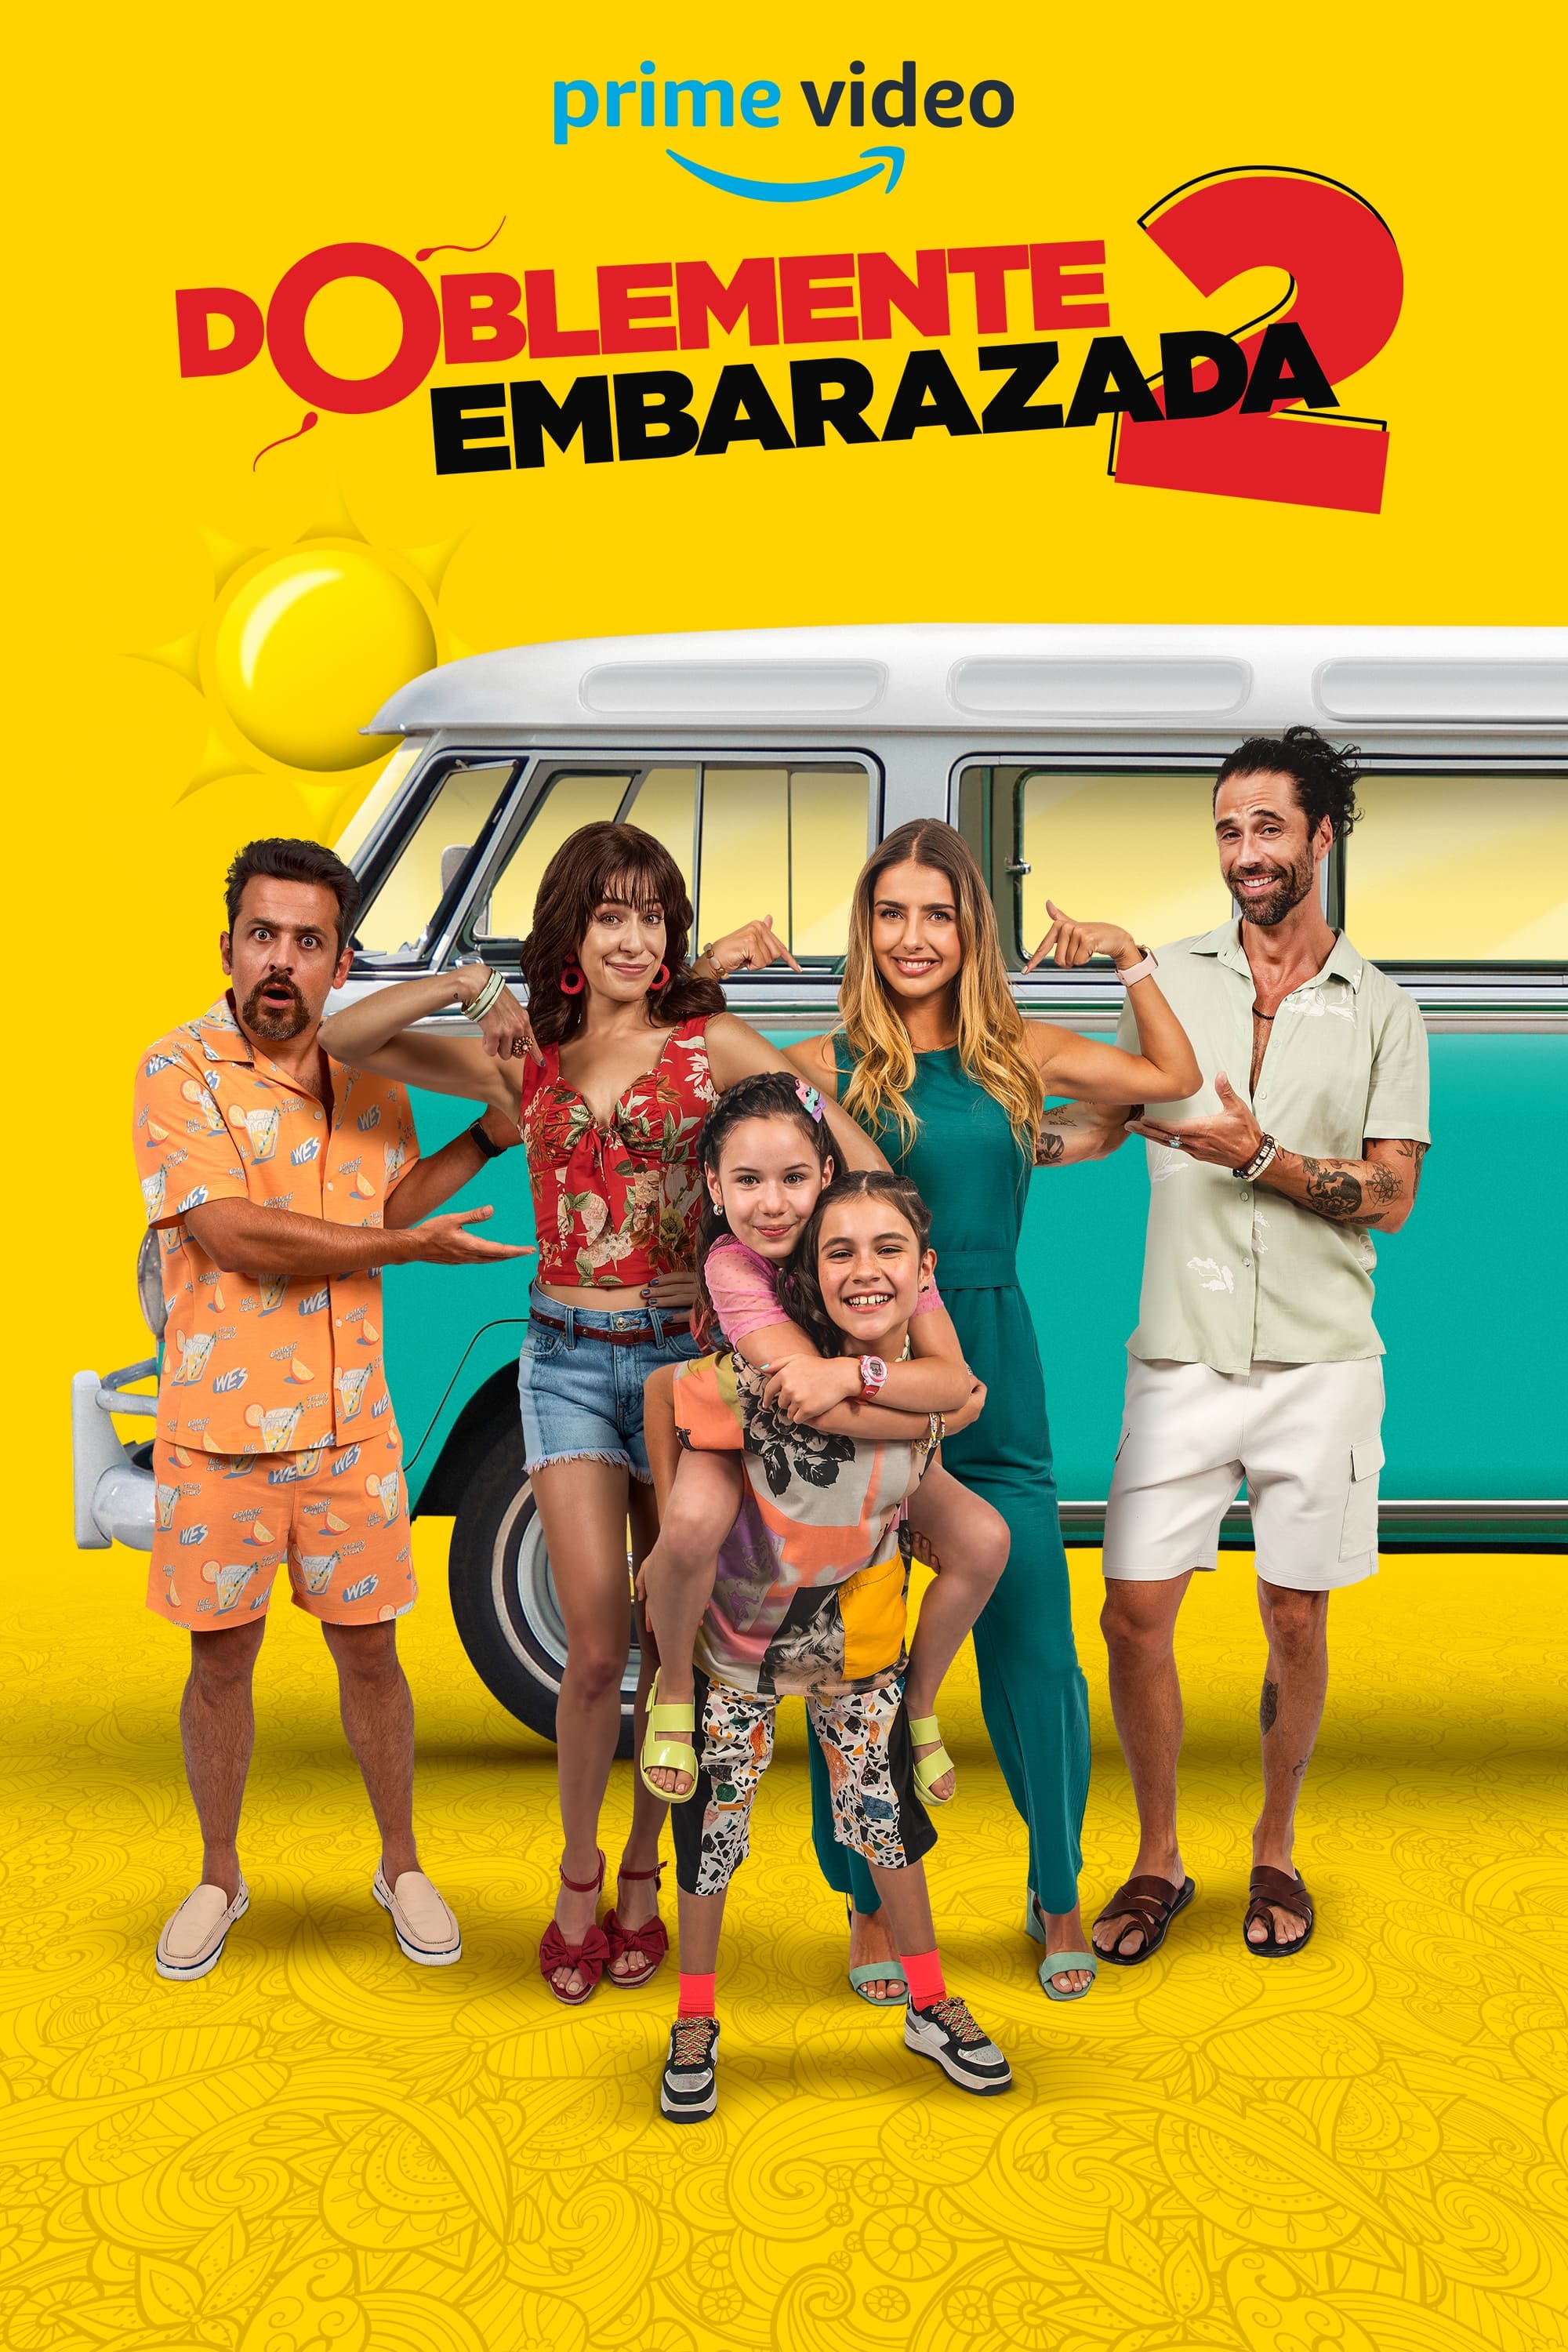 Javier and Felipe are now full-time parents to their daughters. However, the fathers discover the girls are missing something: a mother. To find her, they invite their girlfriends on vacation with a secret plan.